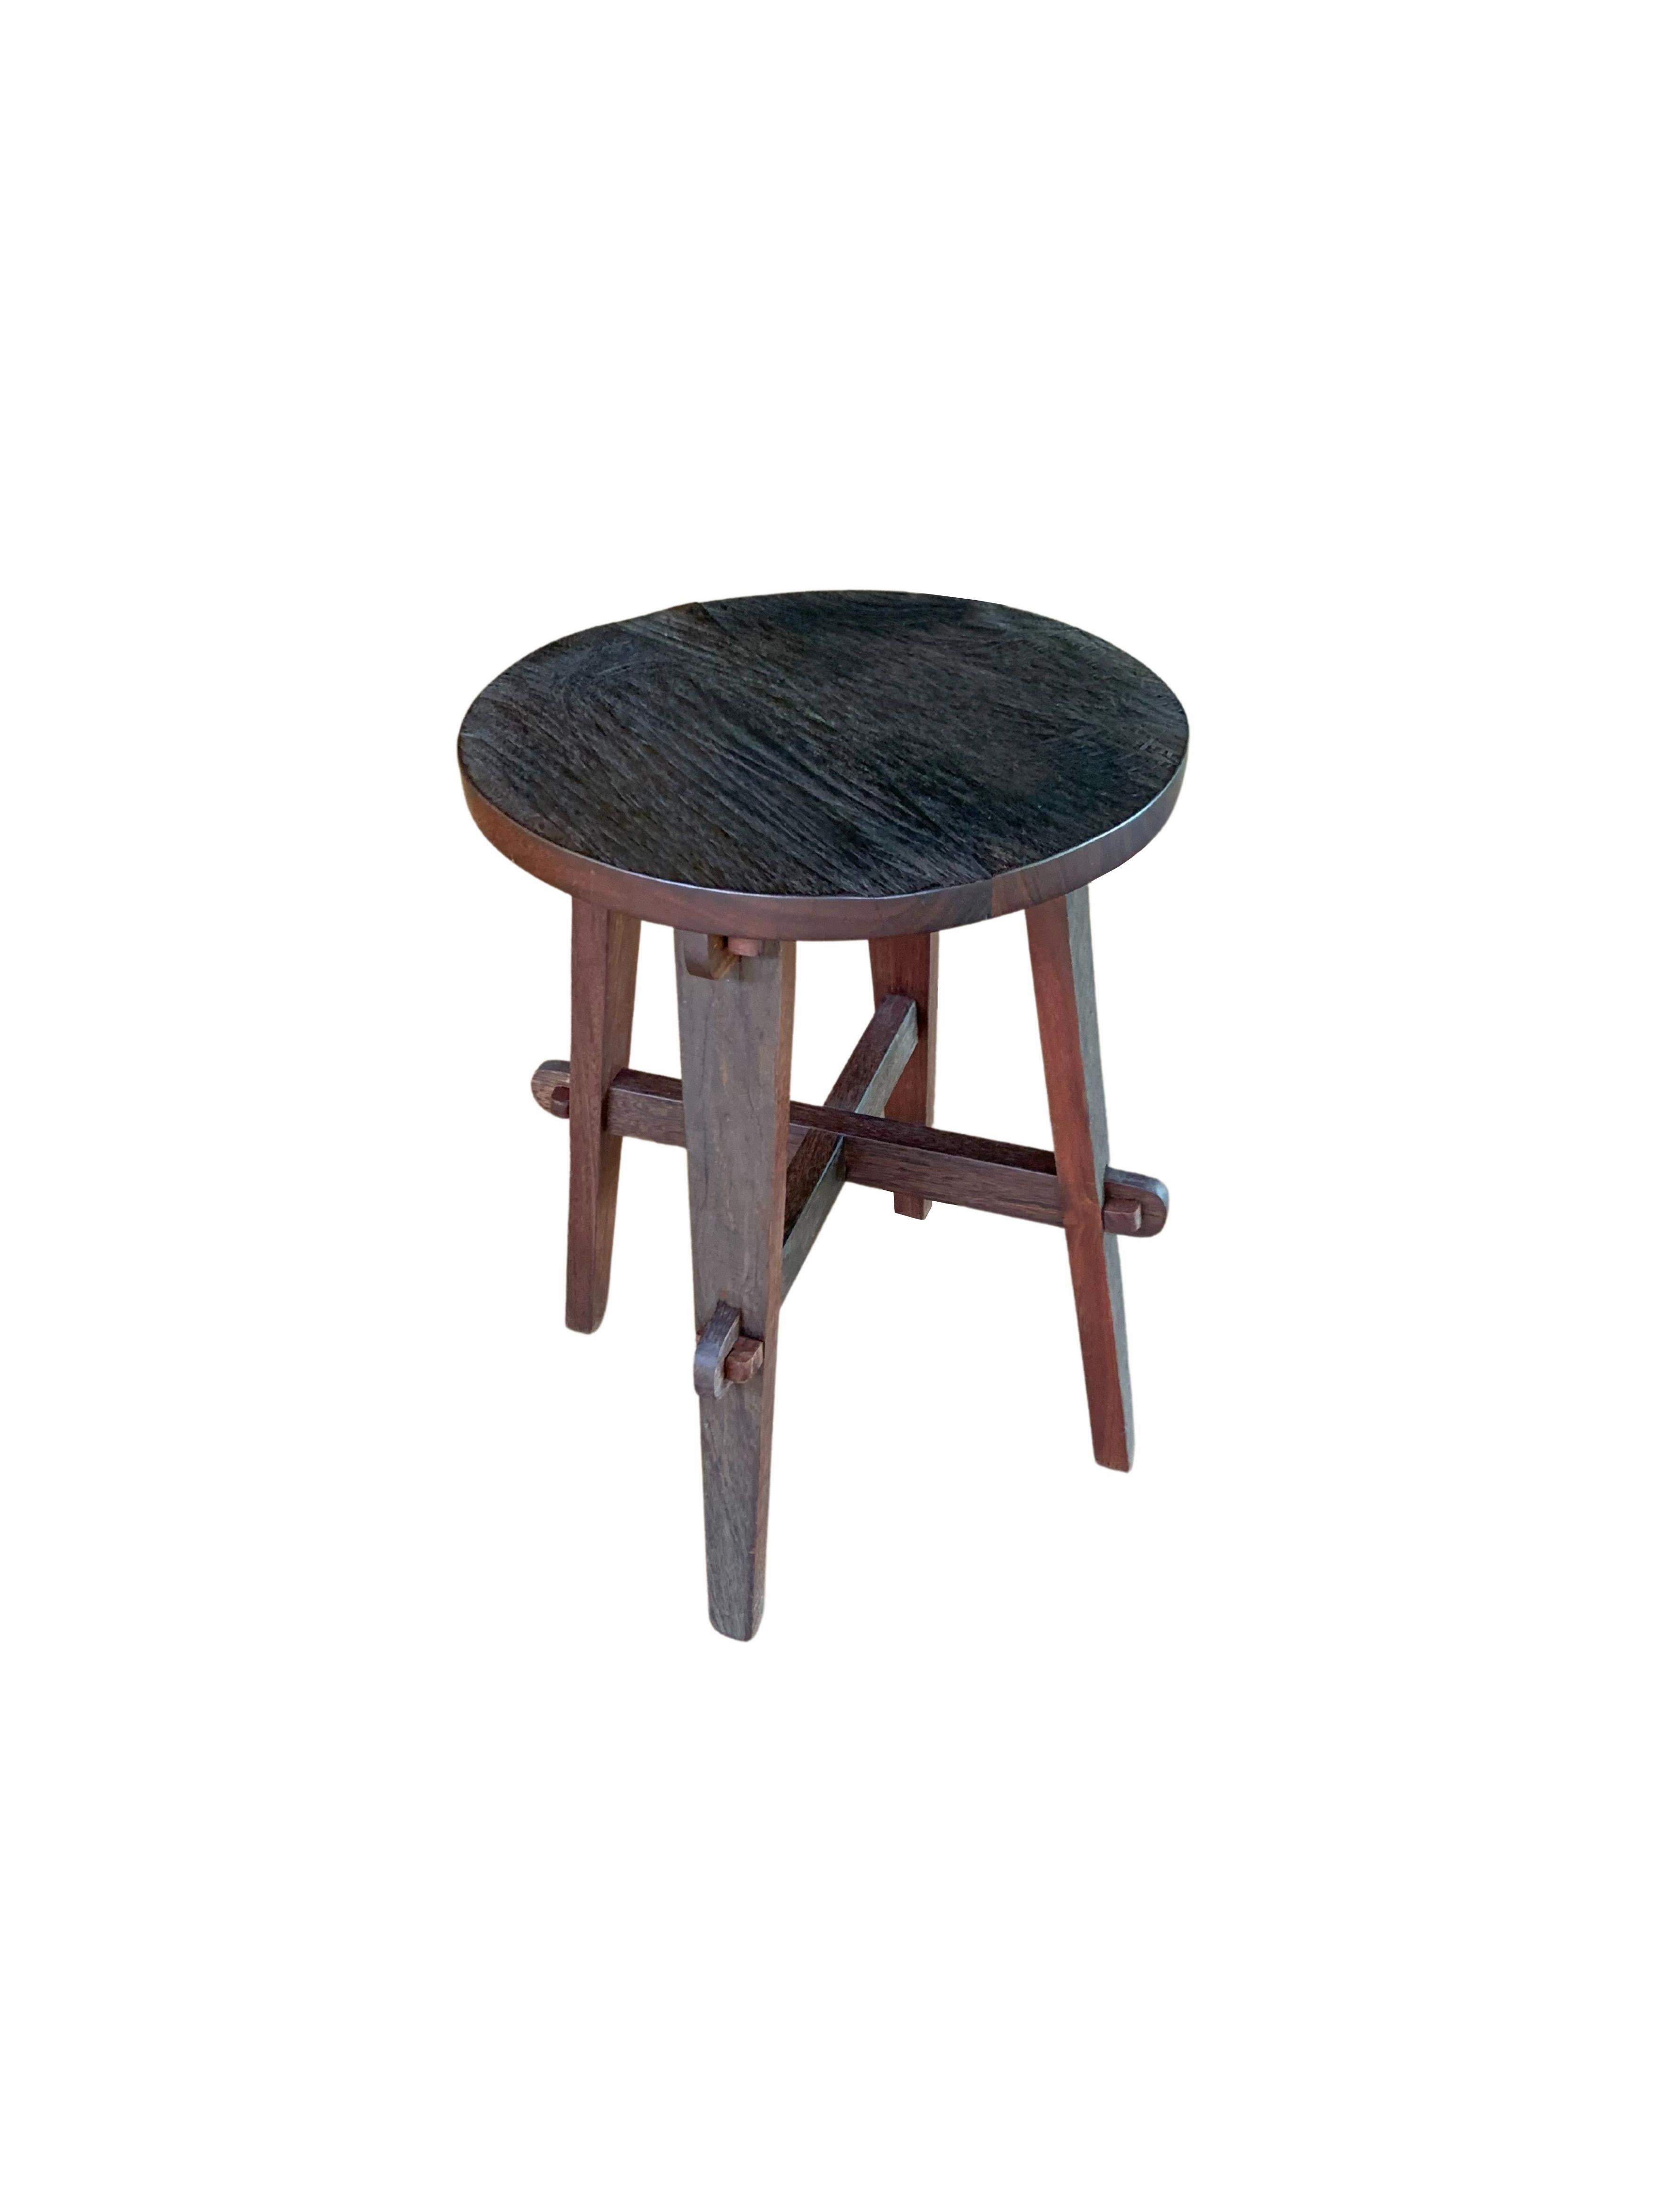 A wonderfully sculptural round stool hand-crafted from reclaimed Ironwood by local Balinese artisans. Its neutral pigment and subtle wood texture makes it perfect for any space. The wood joinery techniques used to secure the legs and struts add to